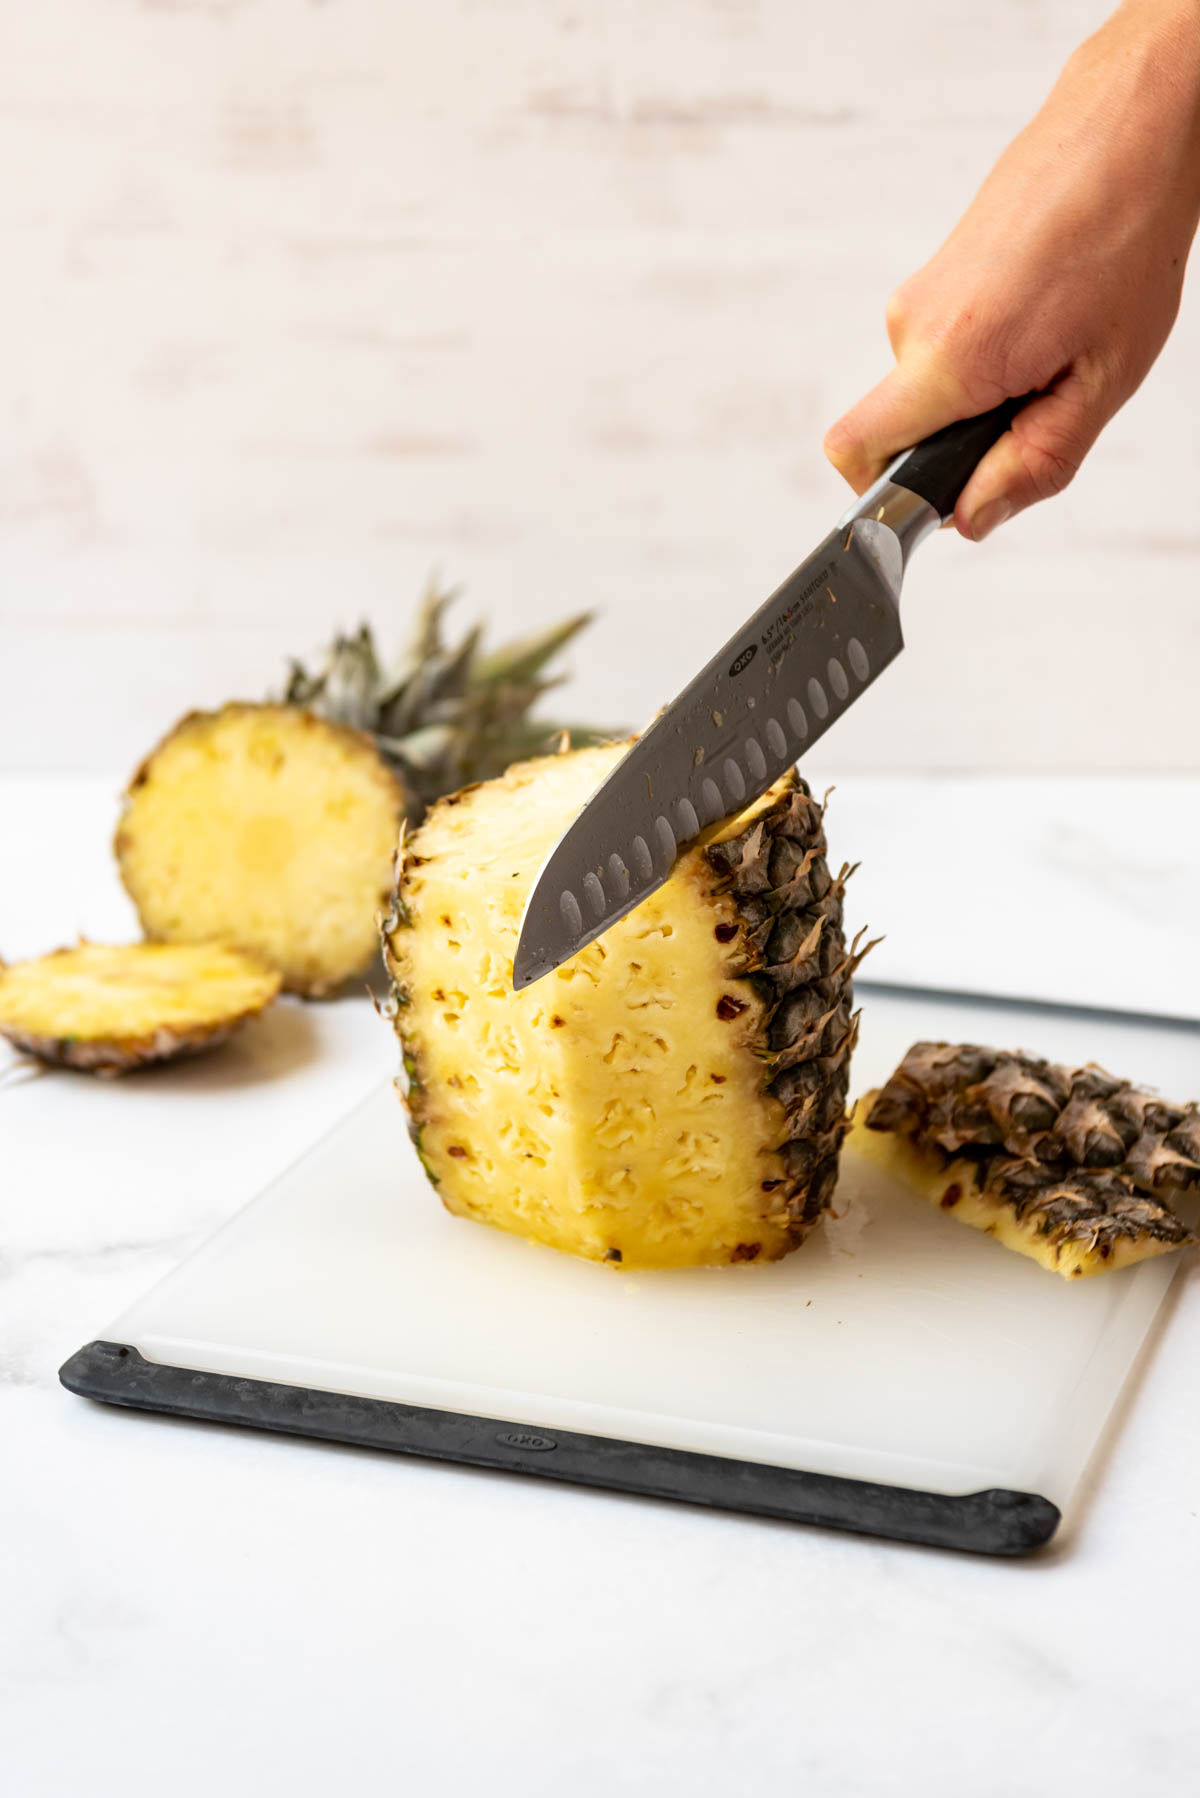 A knife being used to remove the tough outer skin of a fresh pineapple on a cutting board.